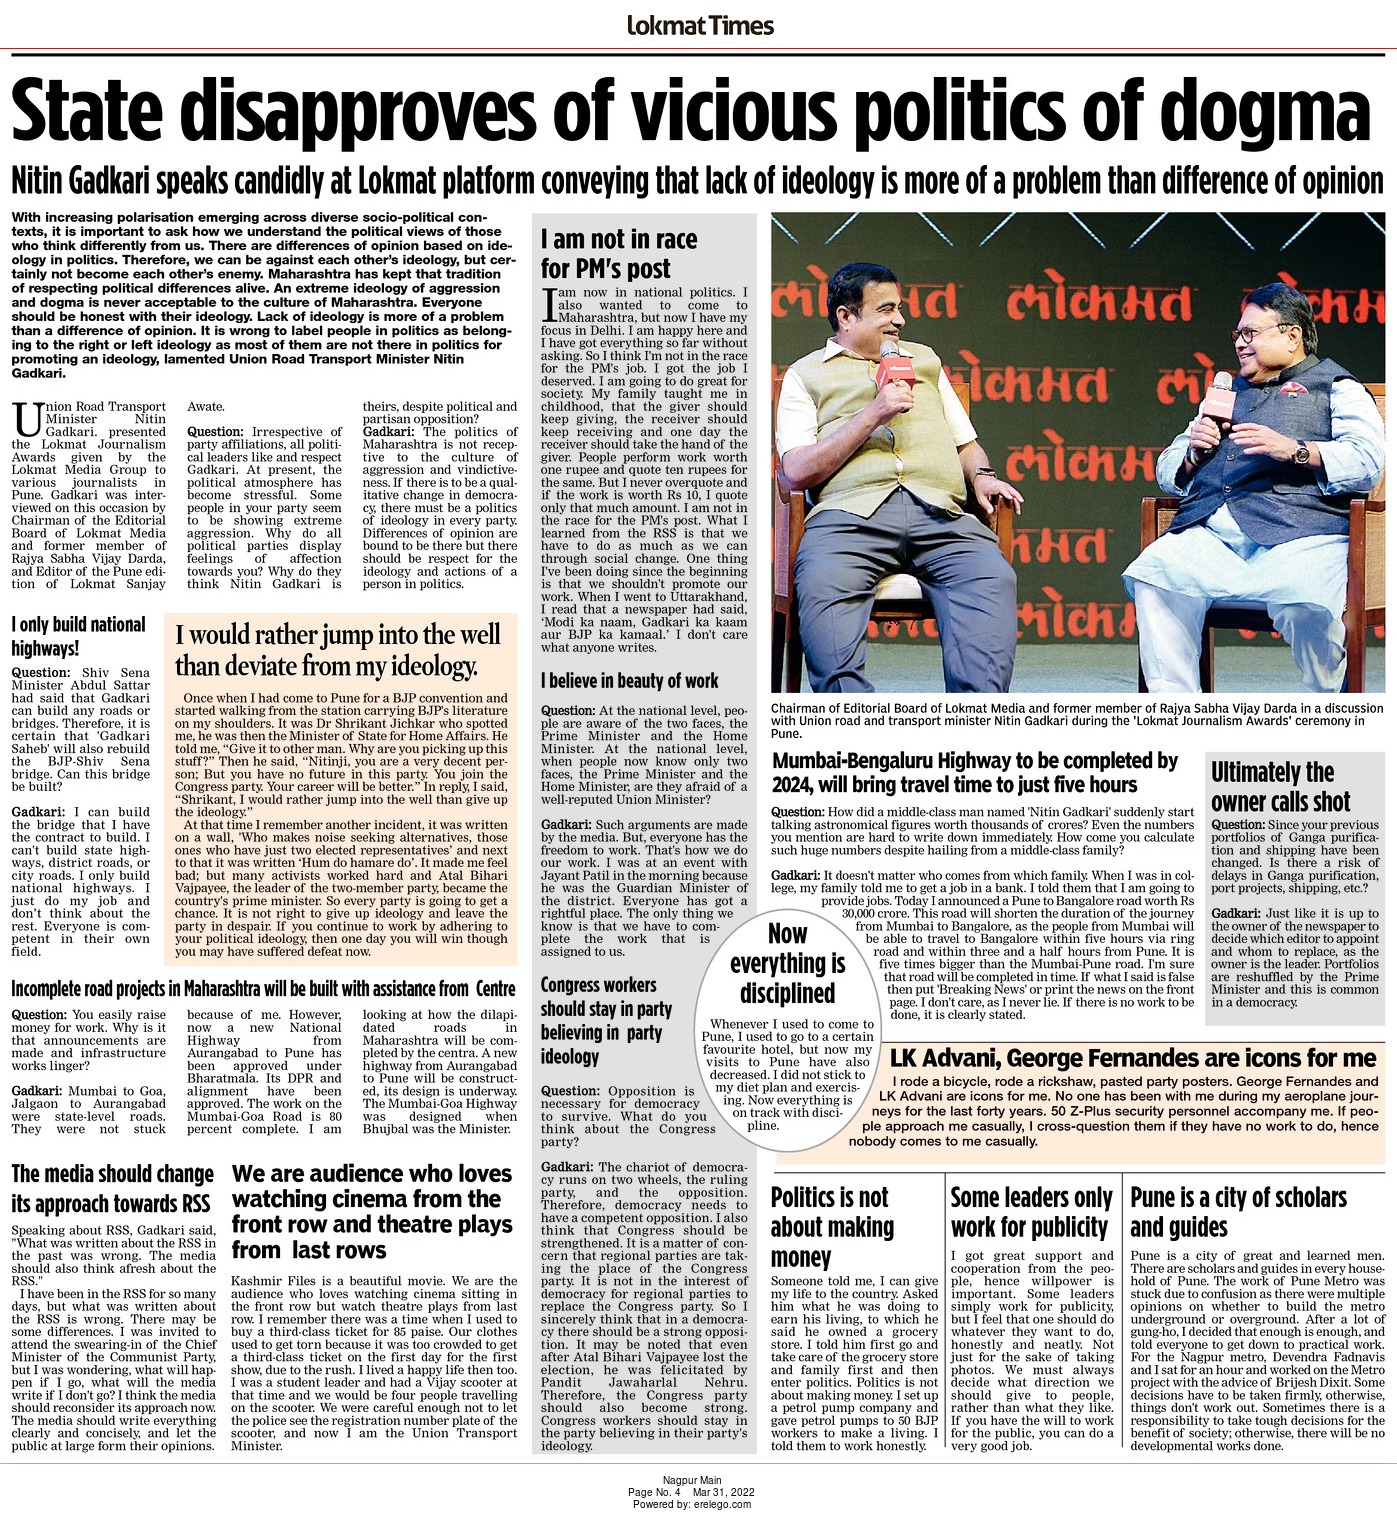 State disapproves of vicious politics of dogma